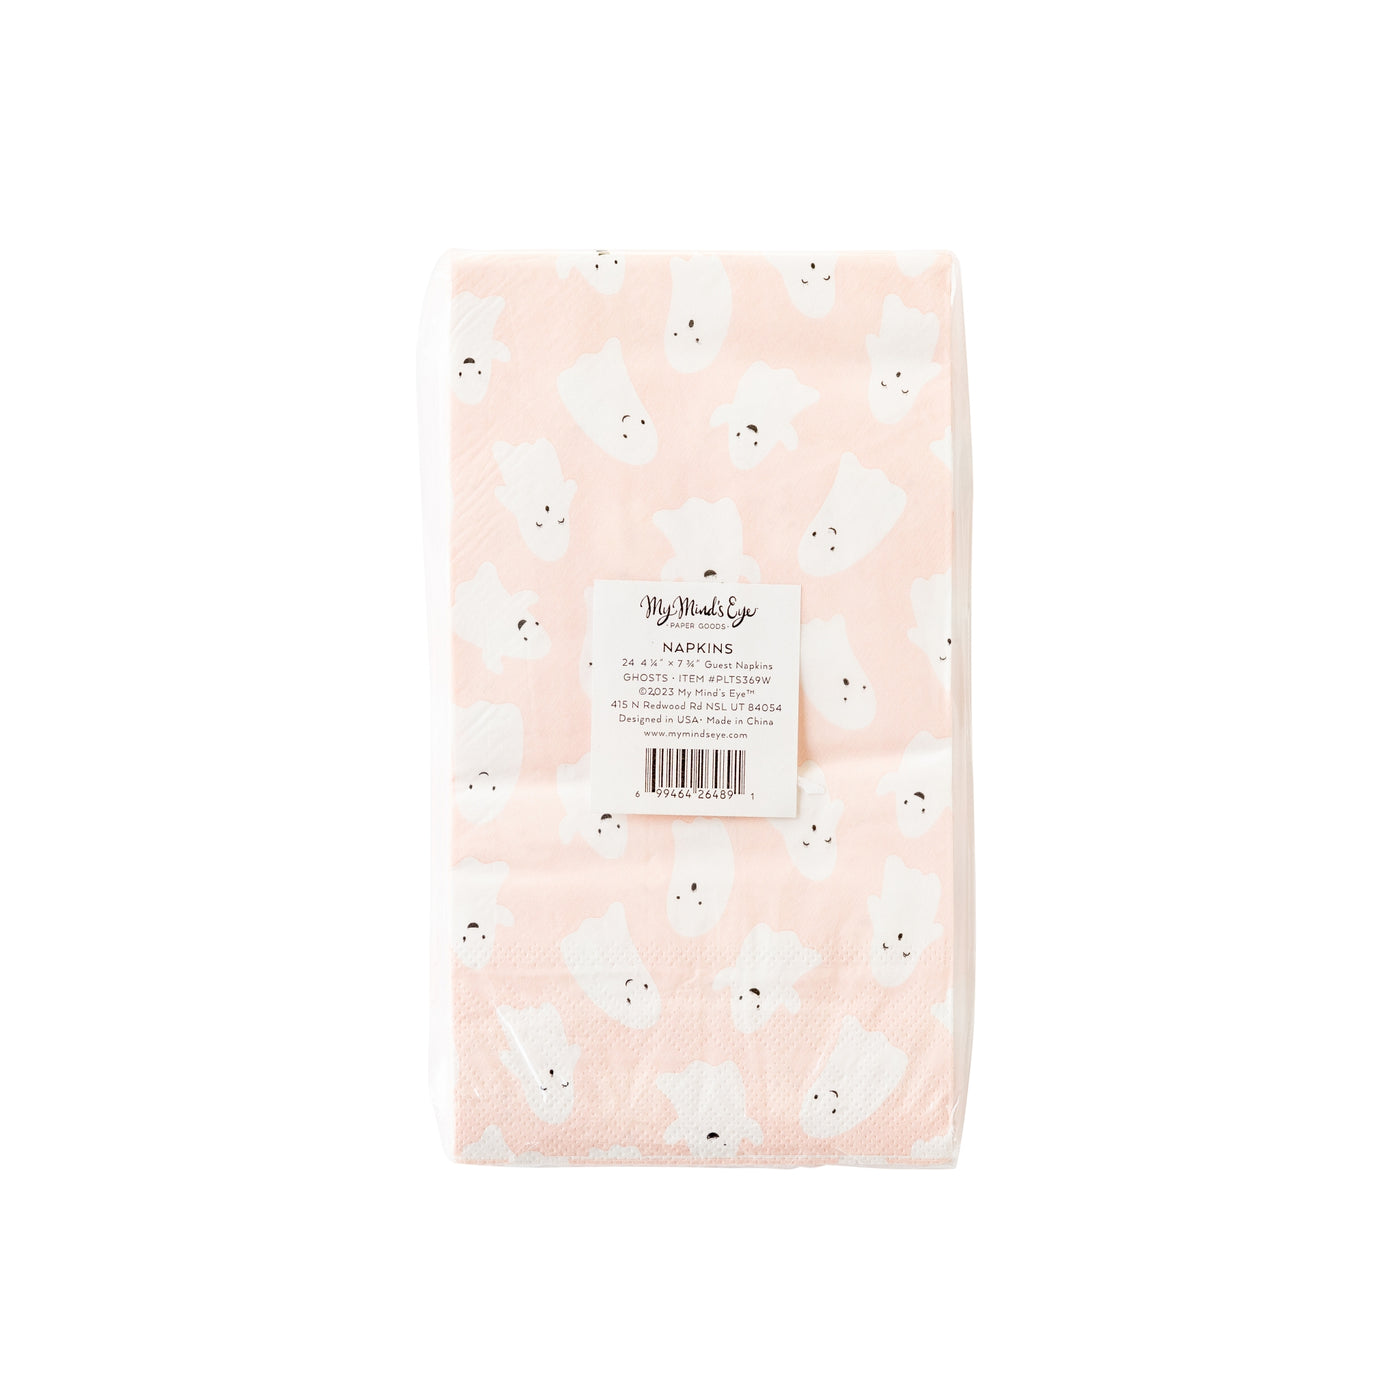 PLTS369W - Scattered Pink Ghosts Paper Dinner Napkin